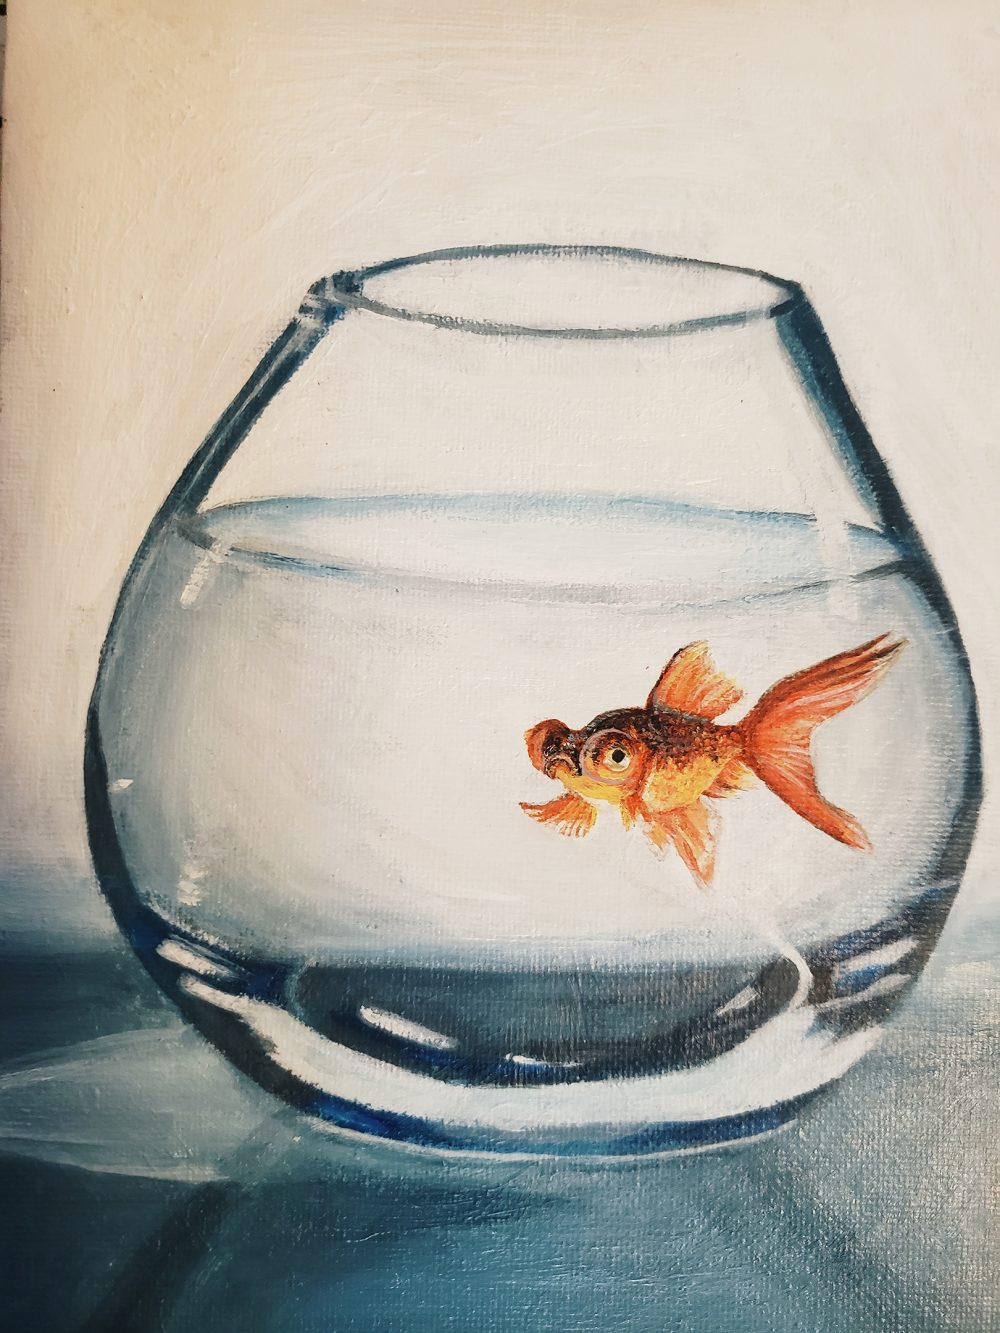 A painting in shades of blue featuring a glass cup and within it is the main focal point of an orange goldfish.